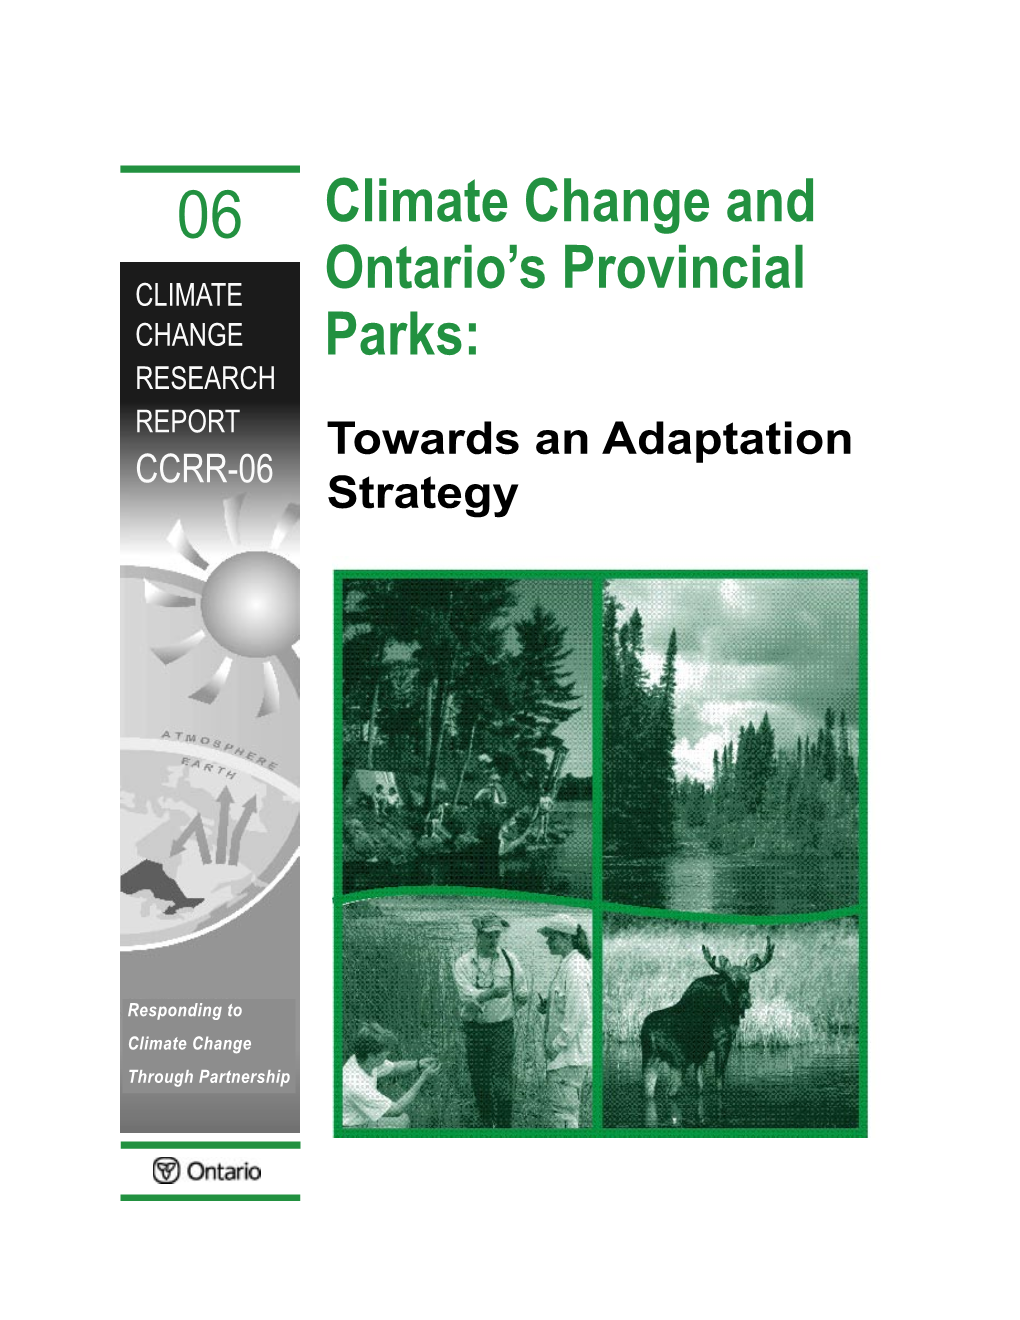 Climate Change and Ontario's Provincial Parks